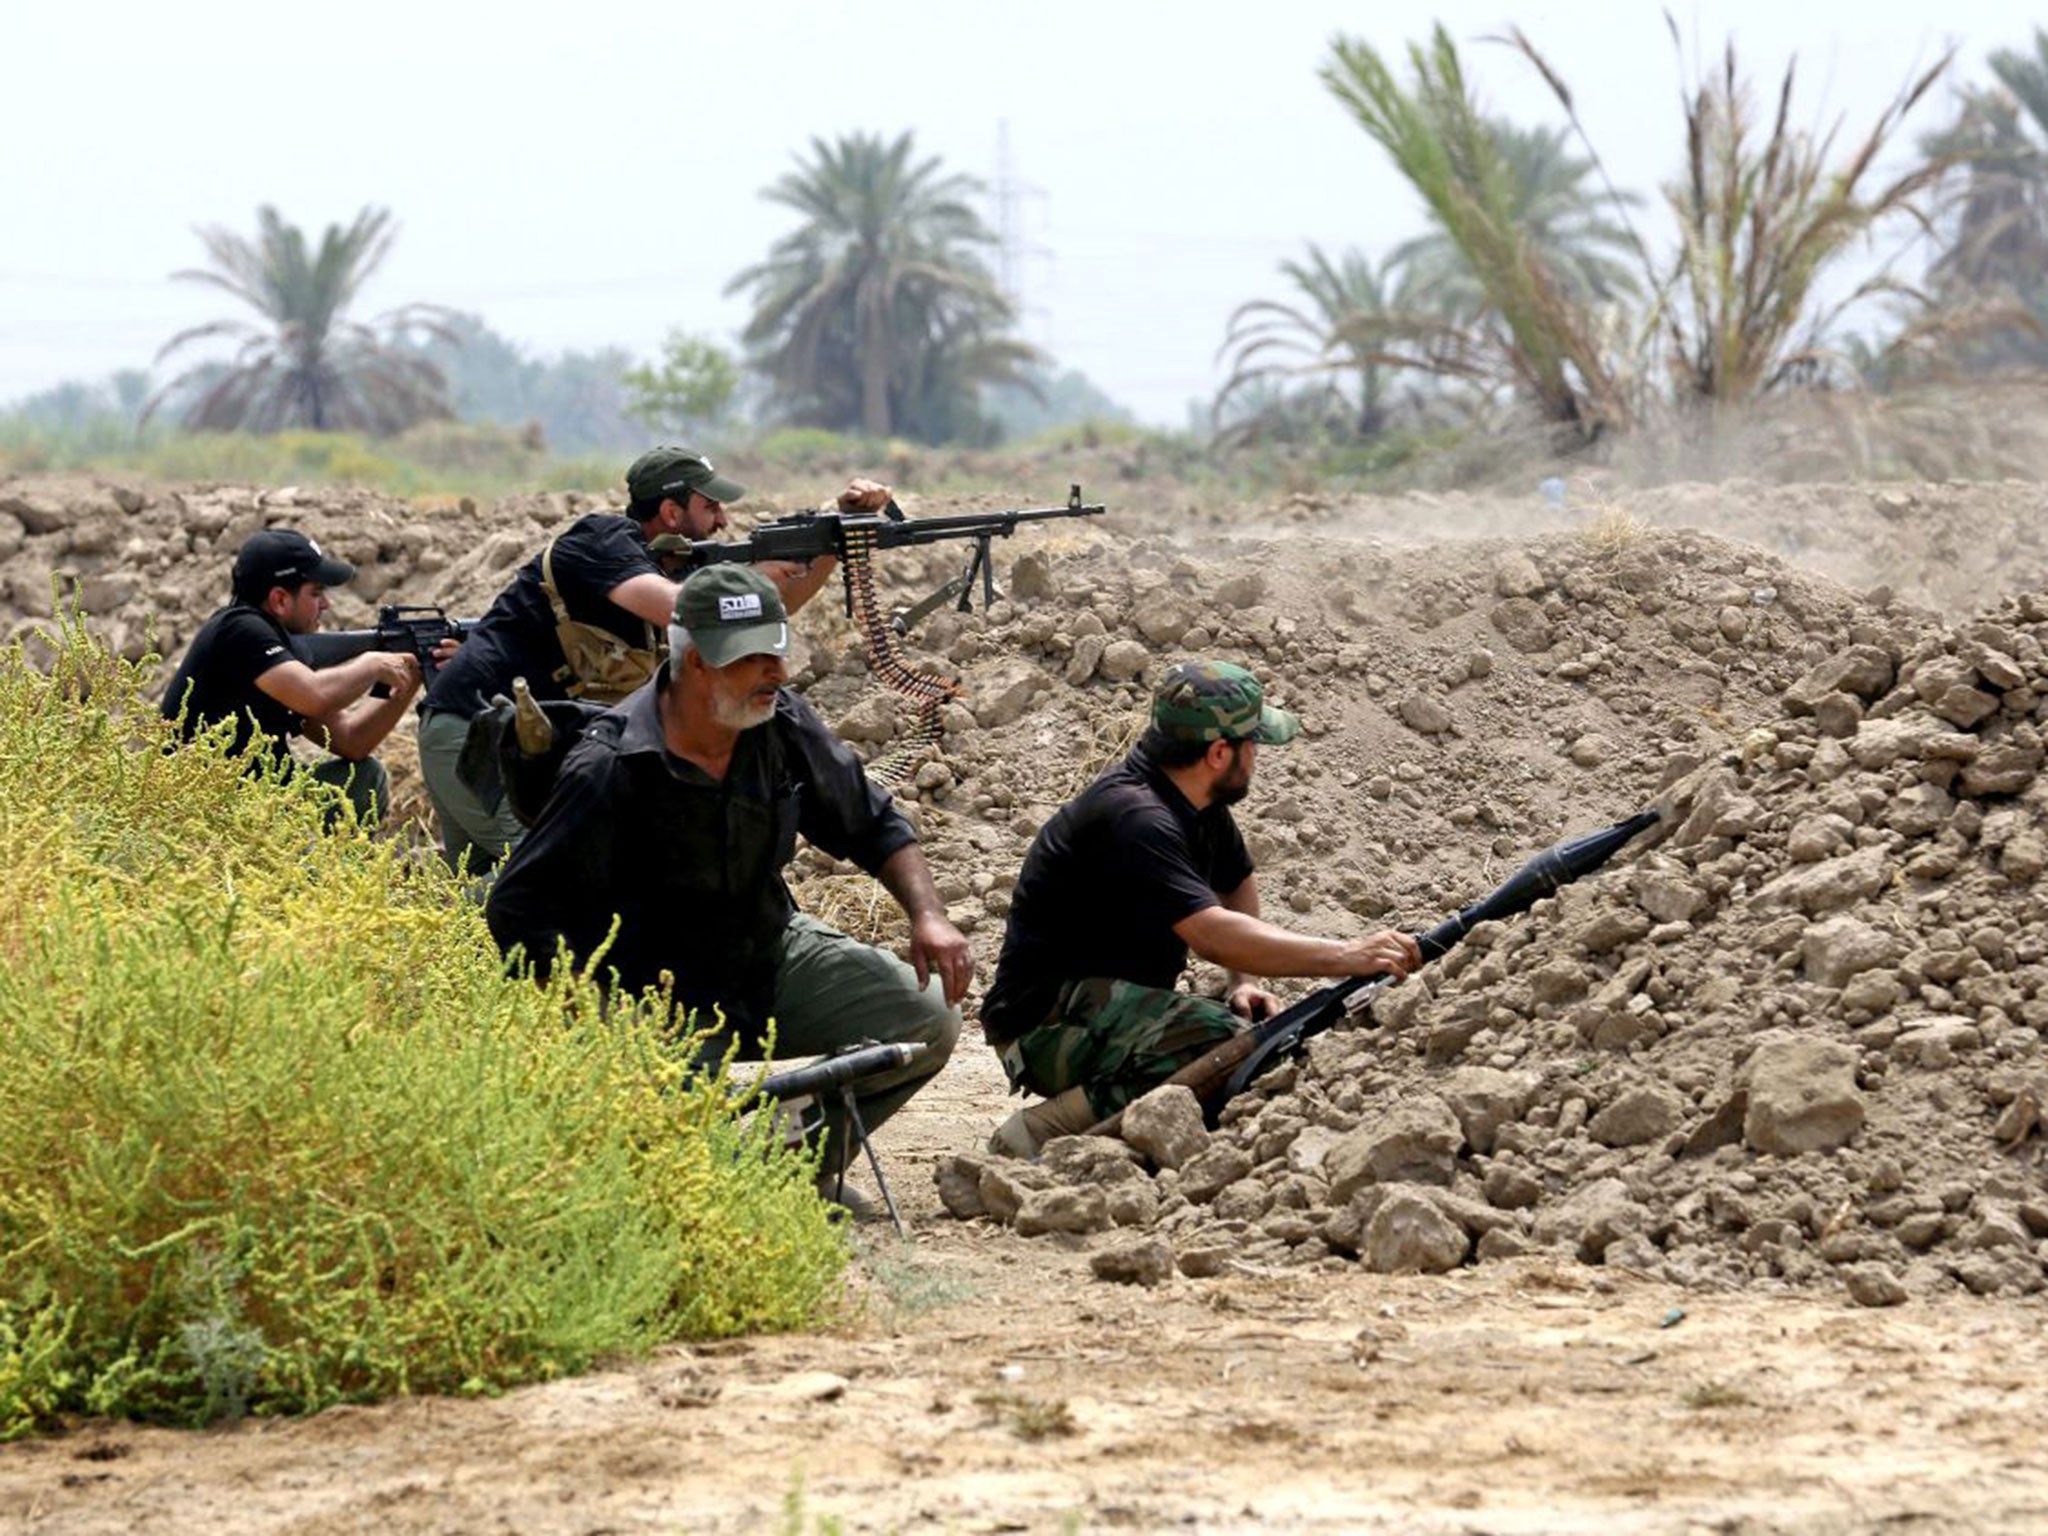 Iraqi Shia fighters prepare to fight Isis militants in Jurf Al Sakhar, 43 miles south of Baghdad (AP)